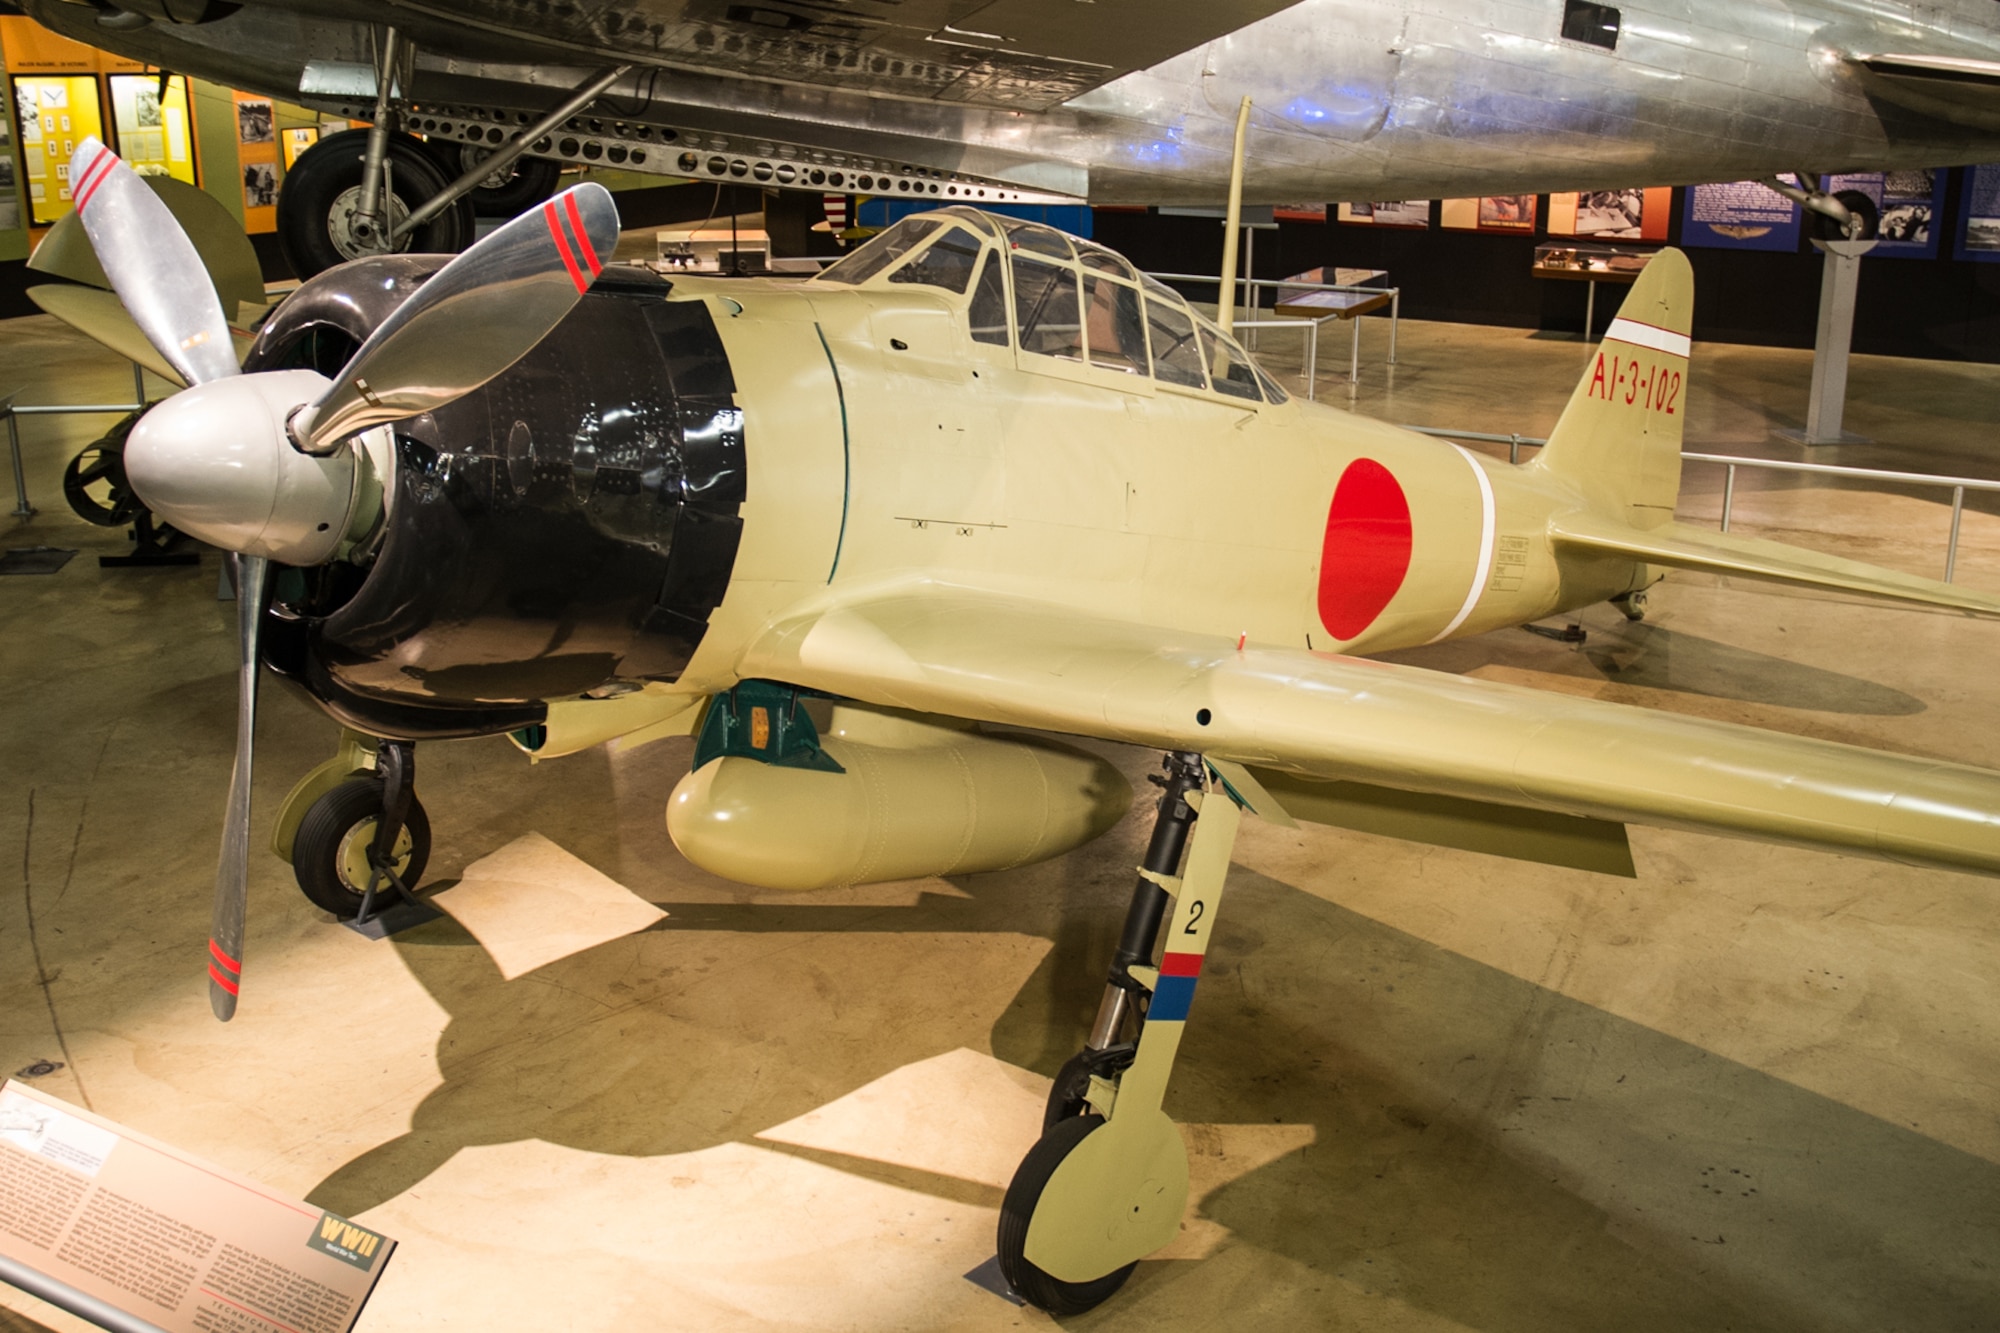 DAYTON, Ohio -- Mitsubishi A62M Zero in the World War II Gallery at the National Museum of the United States Air Force. (U.S. Air Force photo)